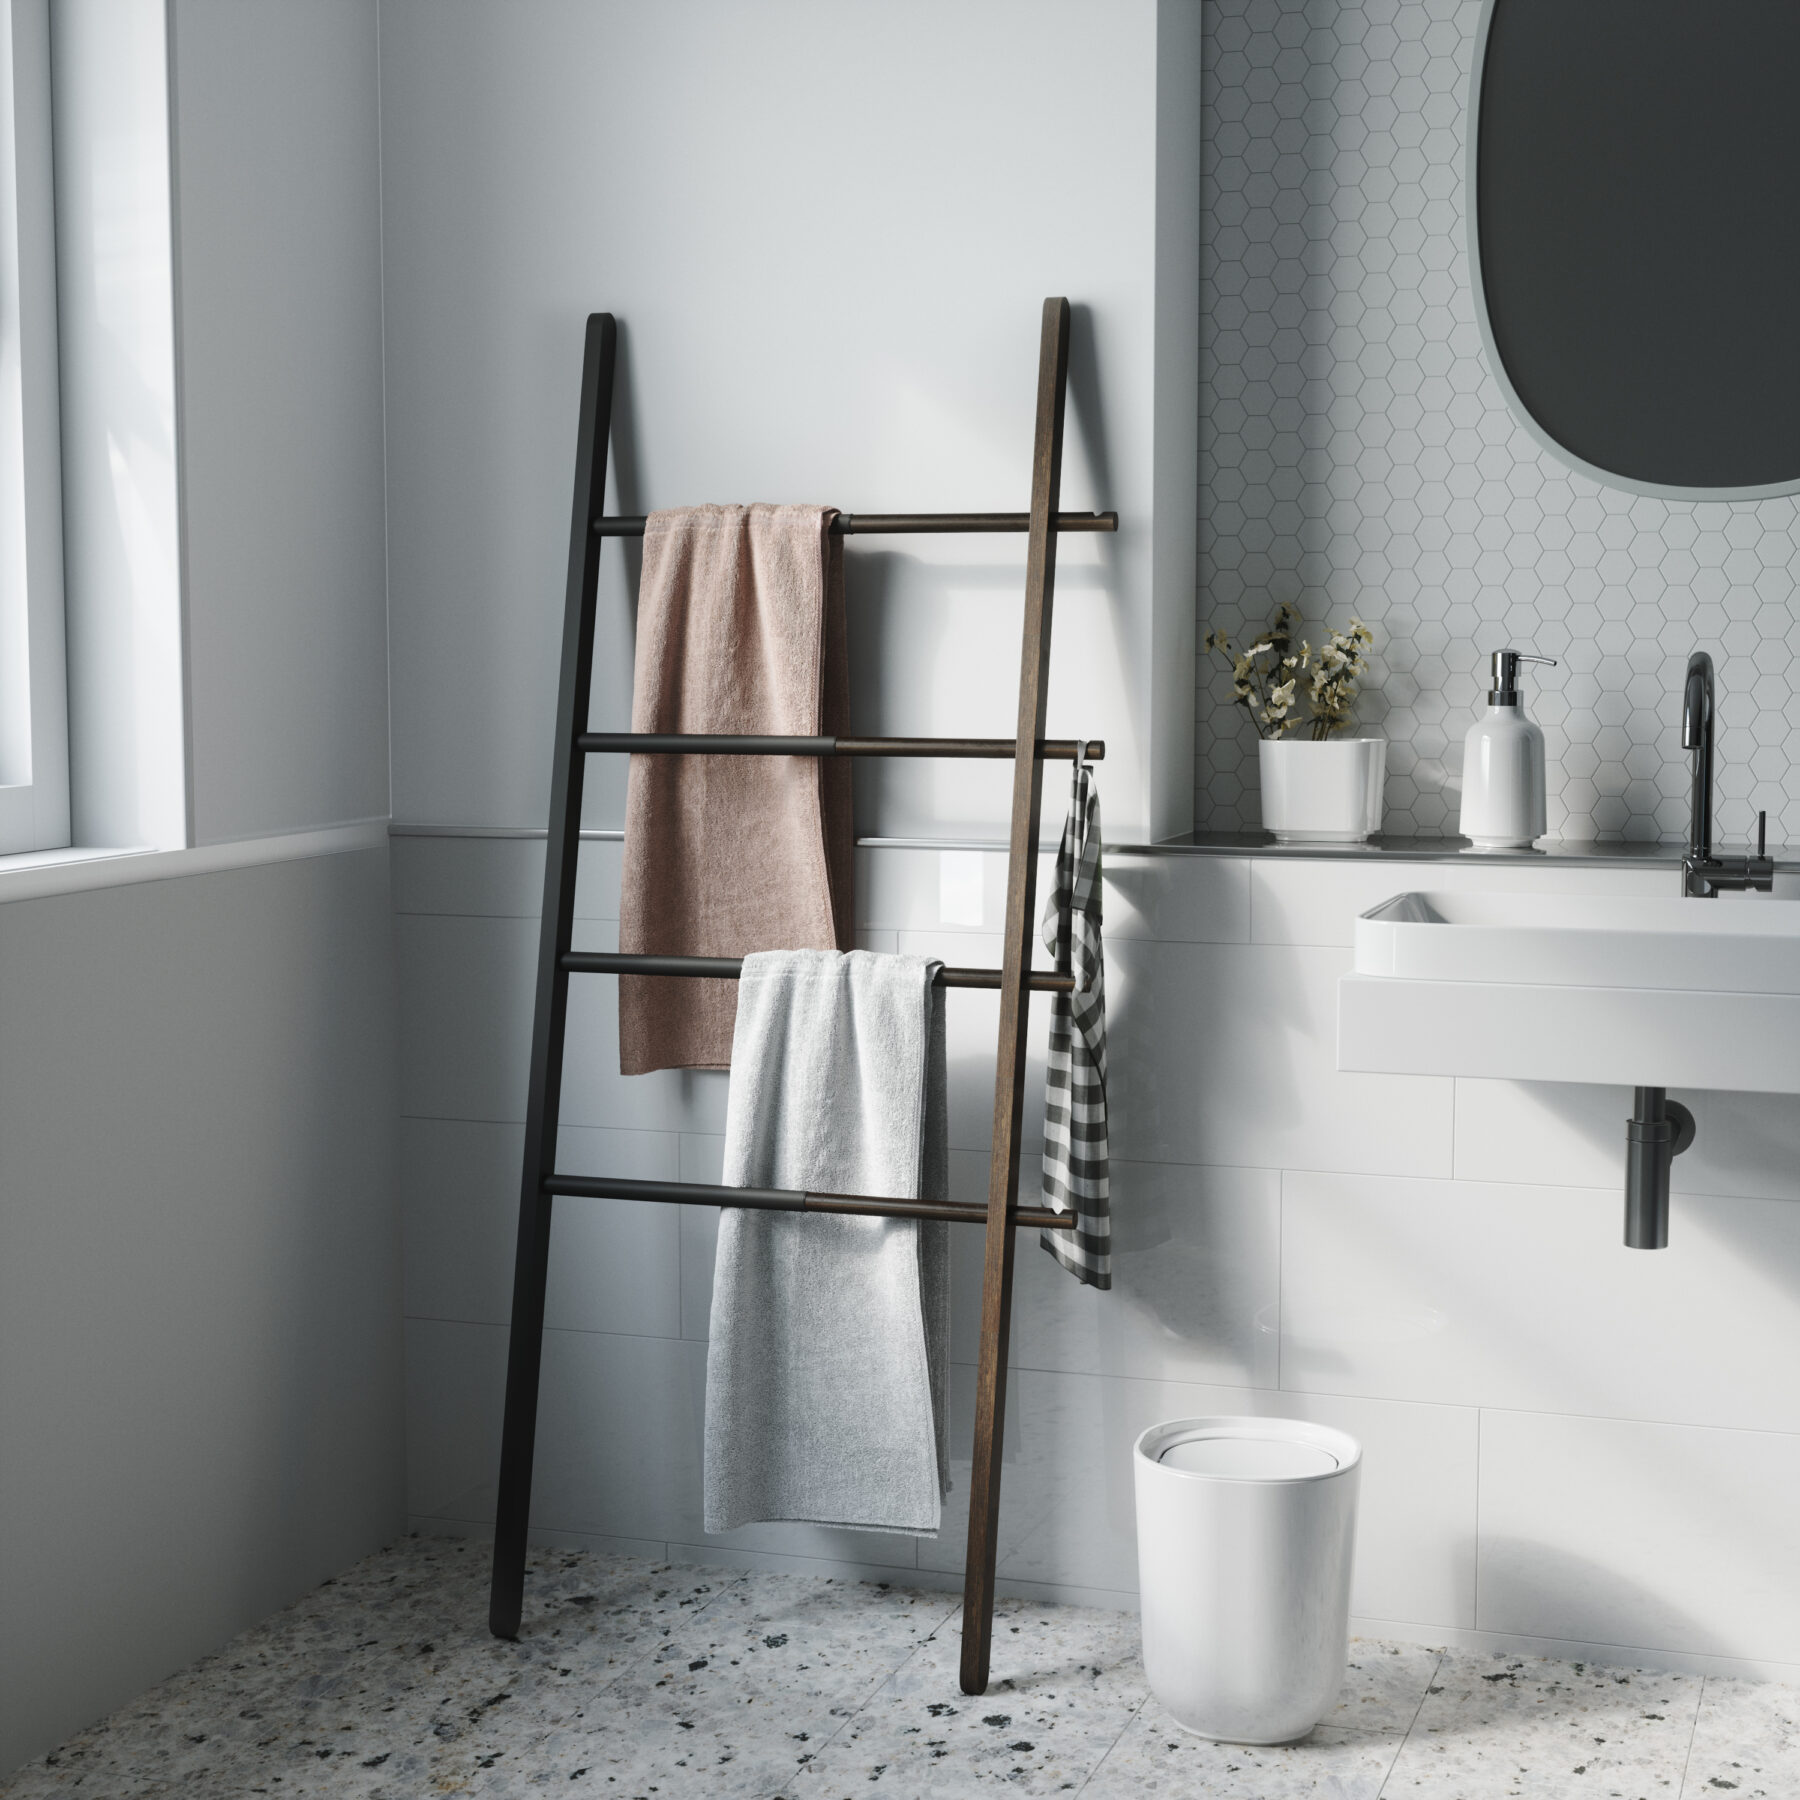 its adjustable size ensures it fits wherever it’s needed most – in both large and small spaces. Hub measures 60 inches x 16.2 inches and its width expands up to 24 inches allowing it to hold larger items such as towels or linens. Made of solid ash wood and powder-coated steel